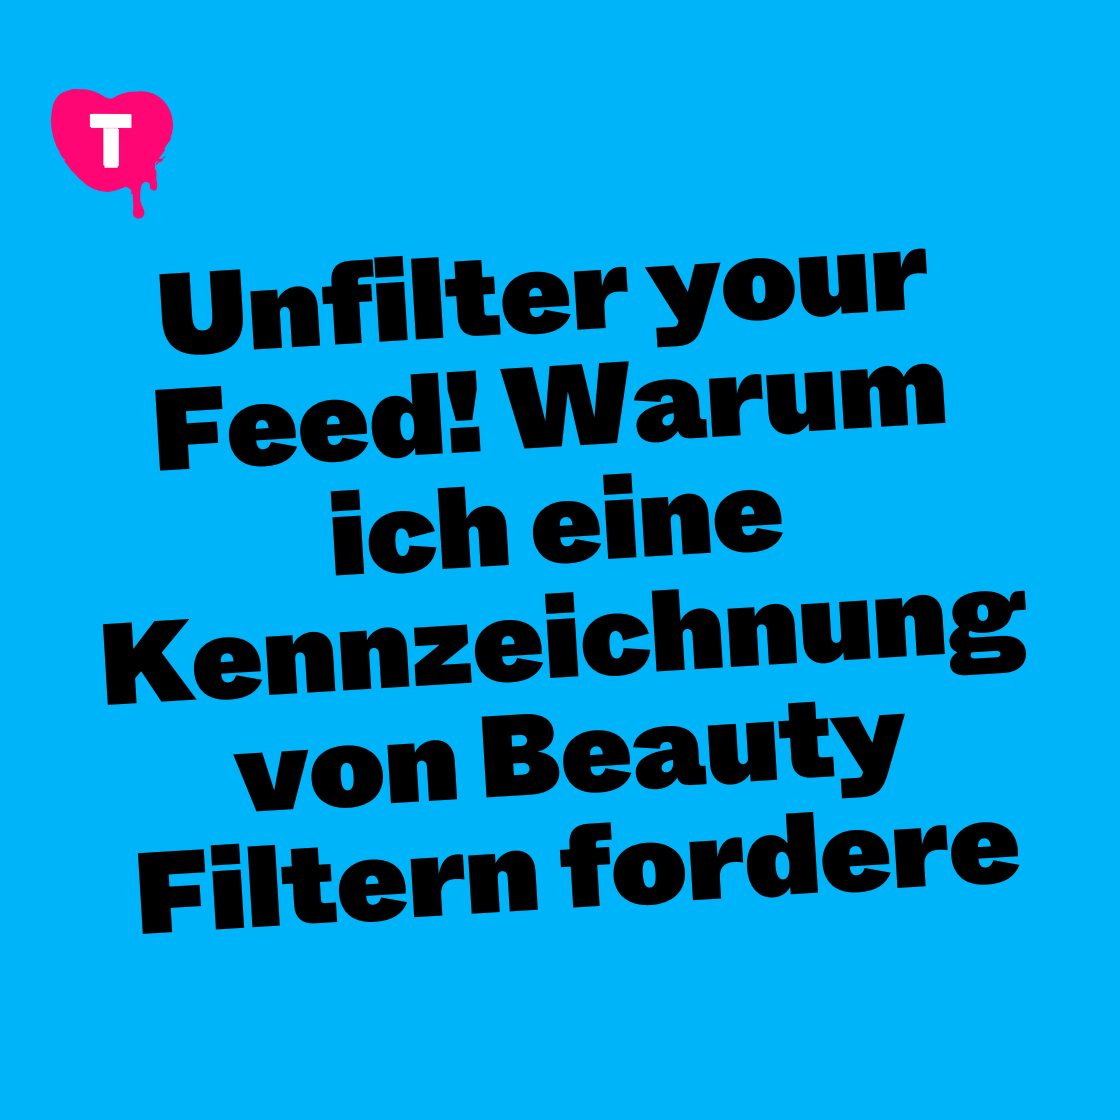 Unfilter your Feed!